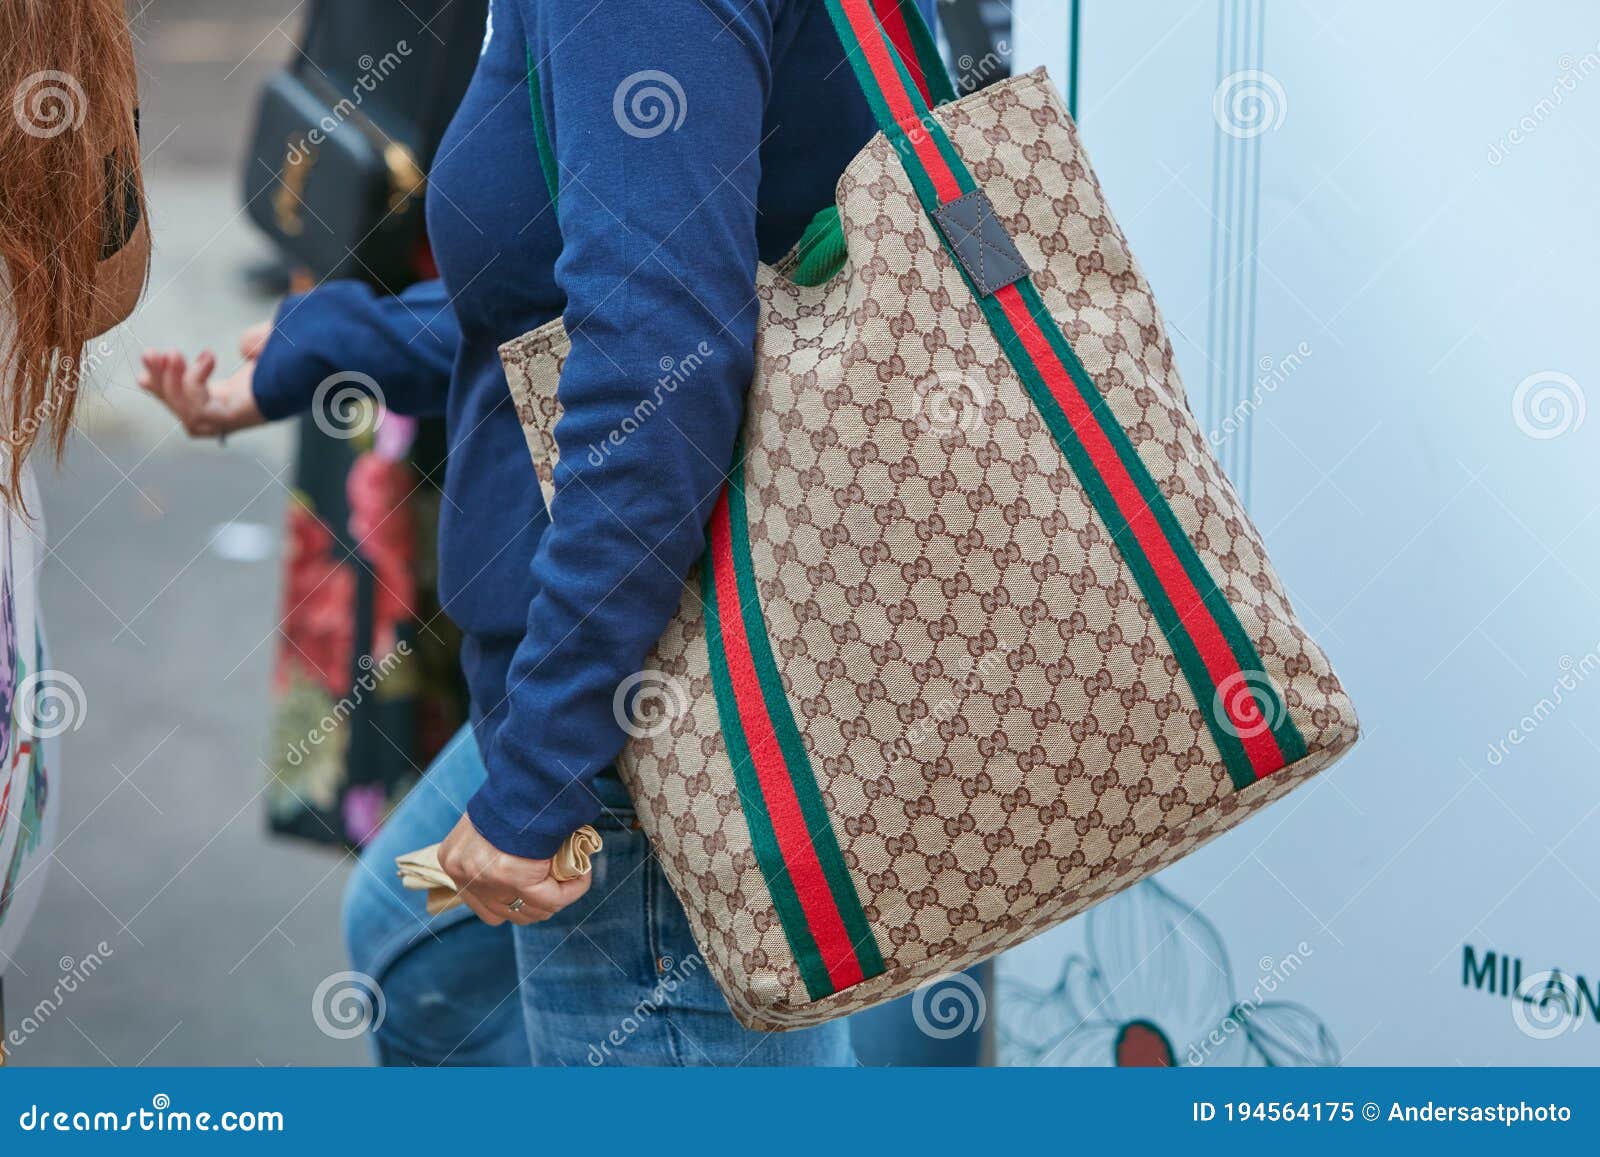 gucci bag with blue and red stripe